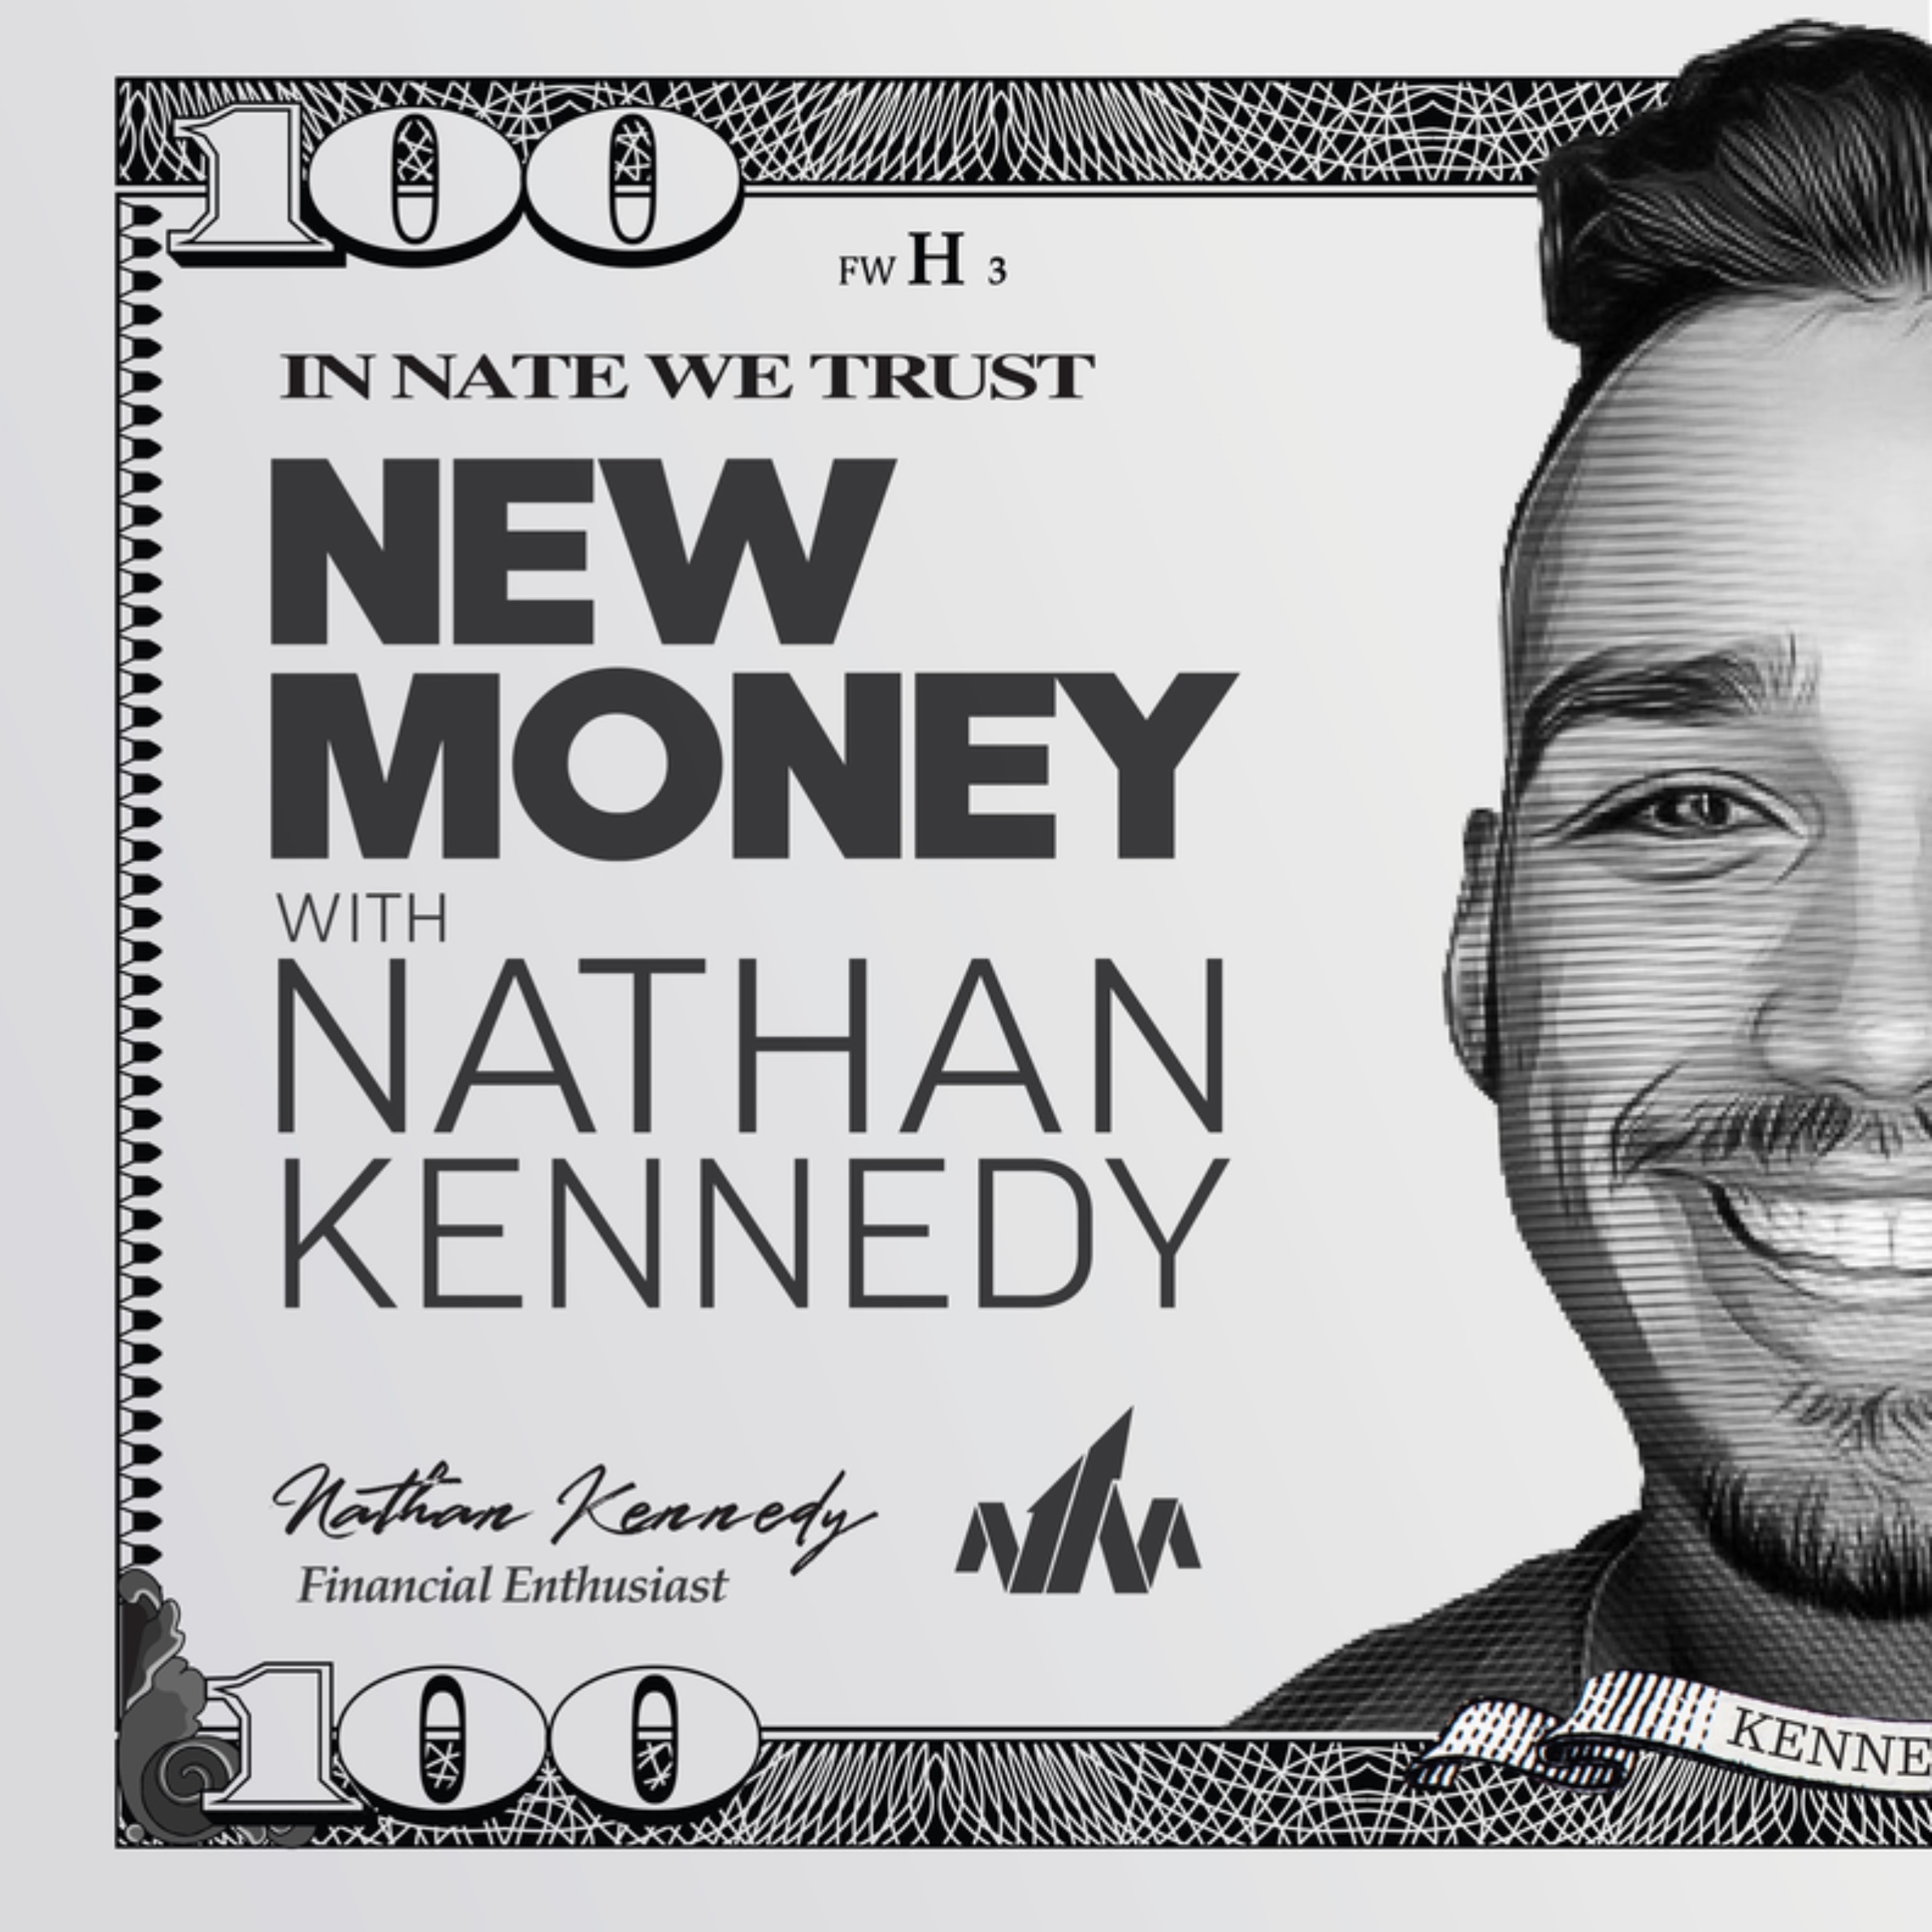 New Money with Nathan Kennedy